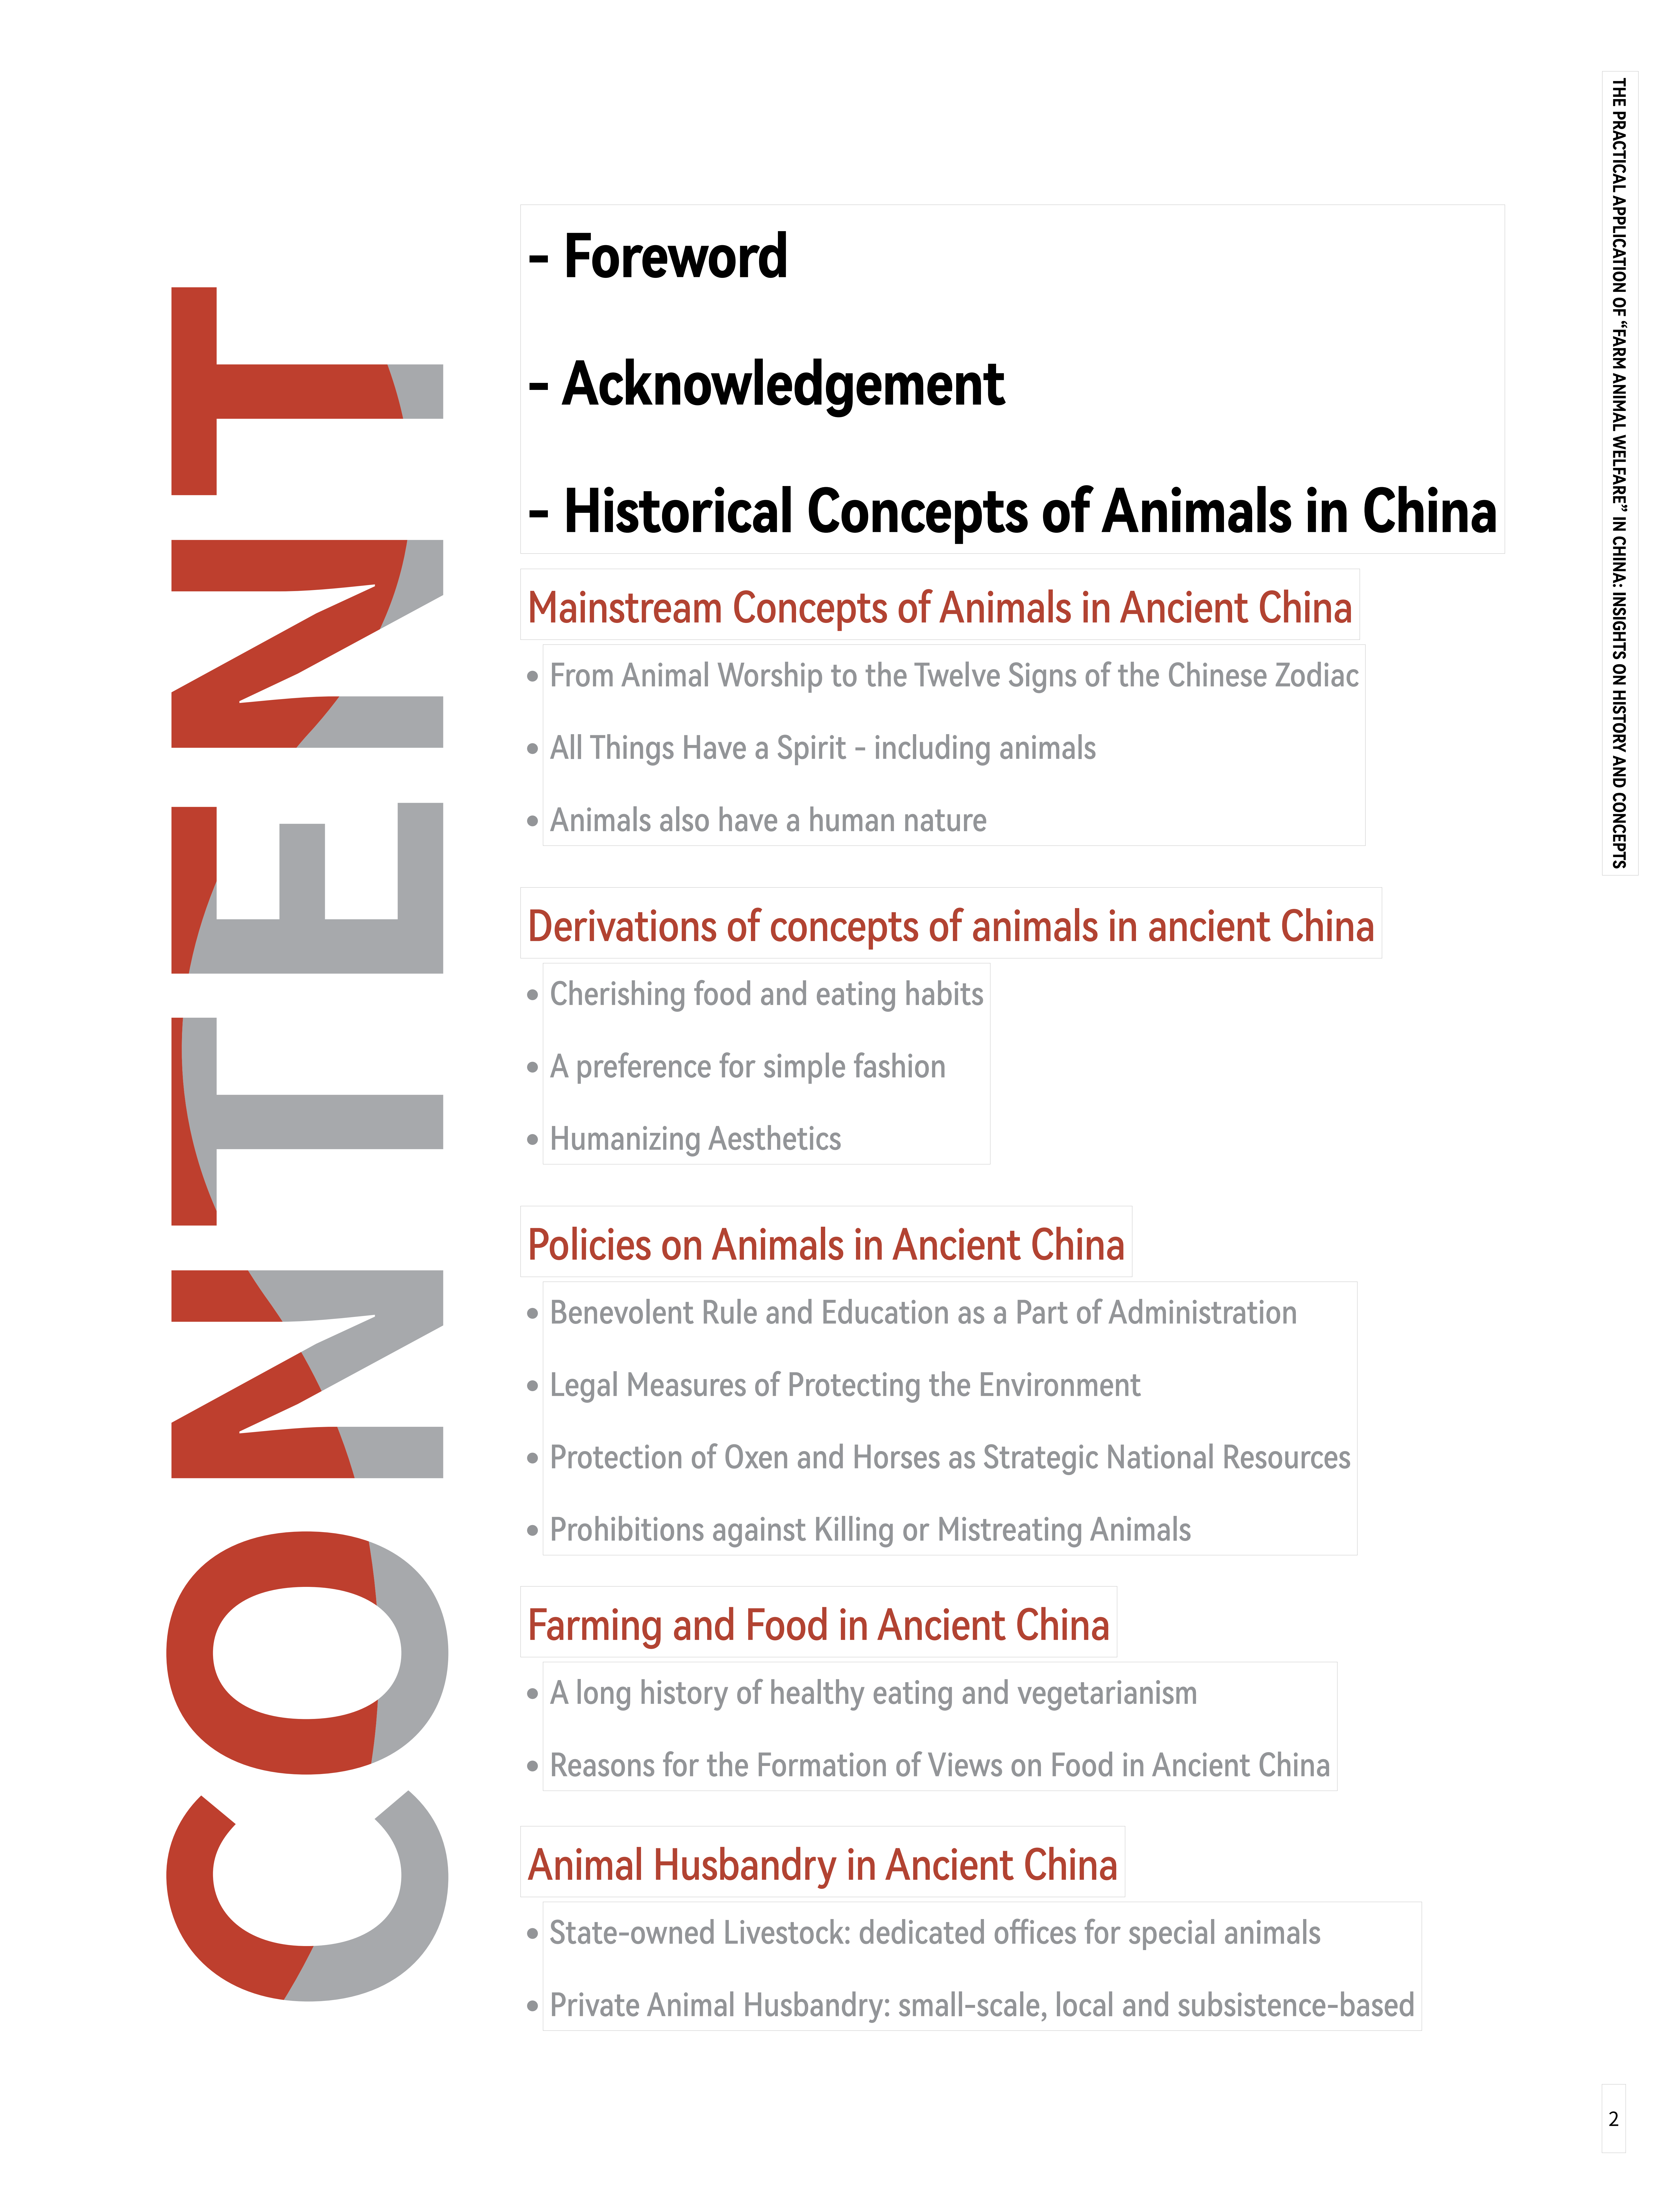 The practical application of farm animal welfare in China- insights on history and concepts_01.png